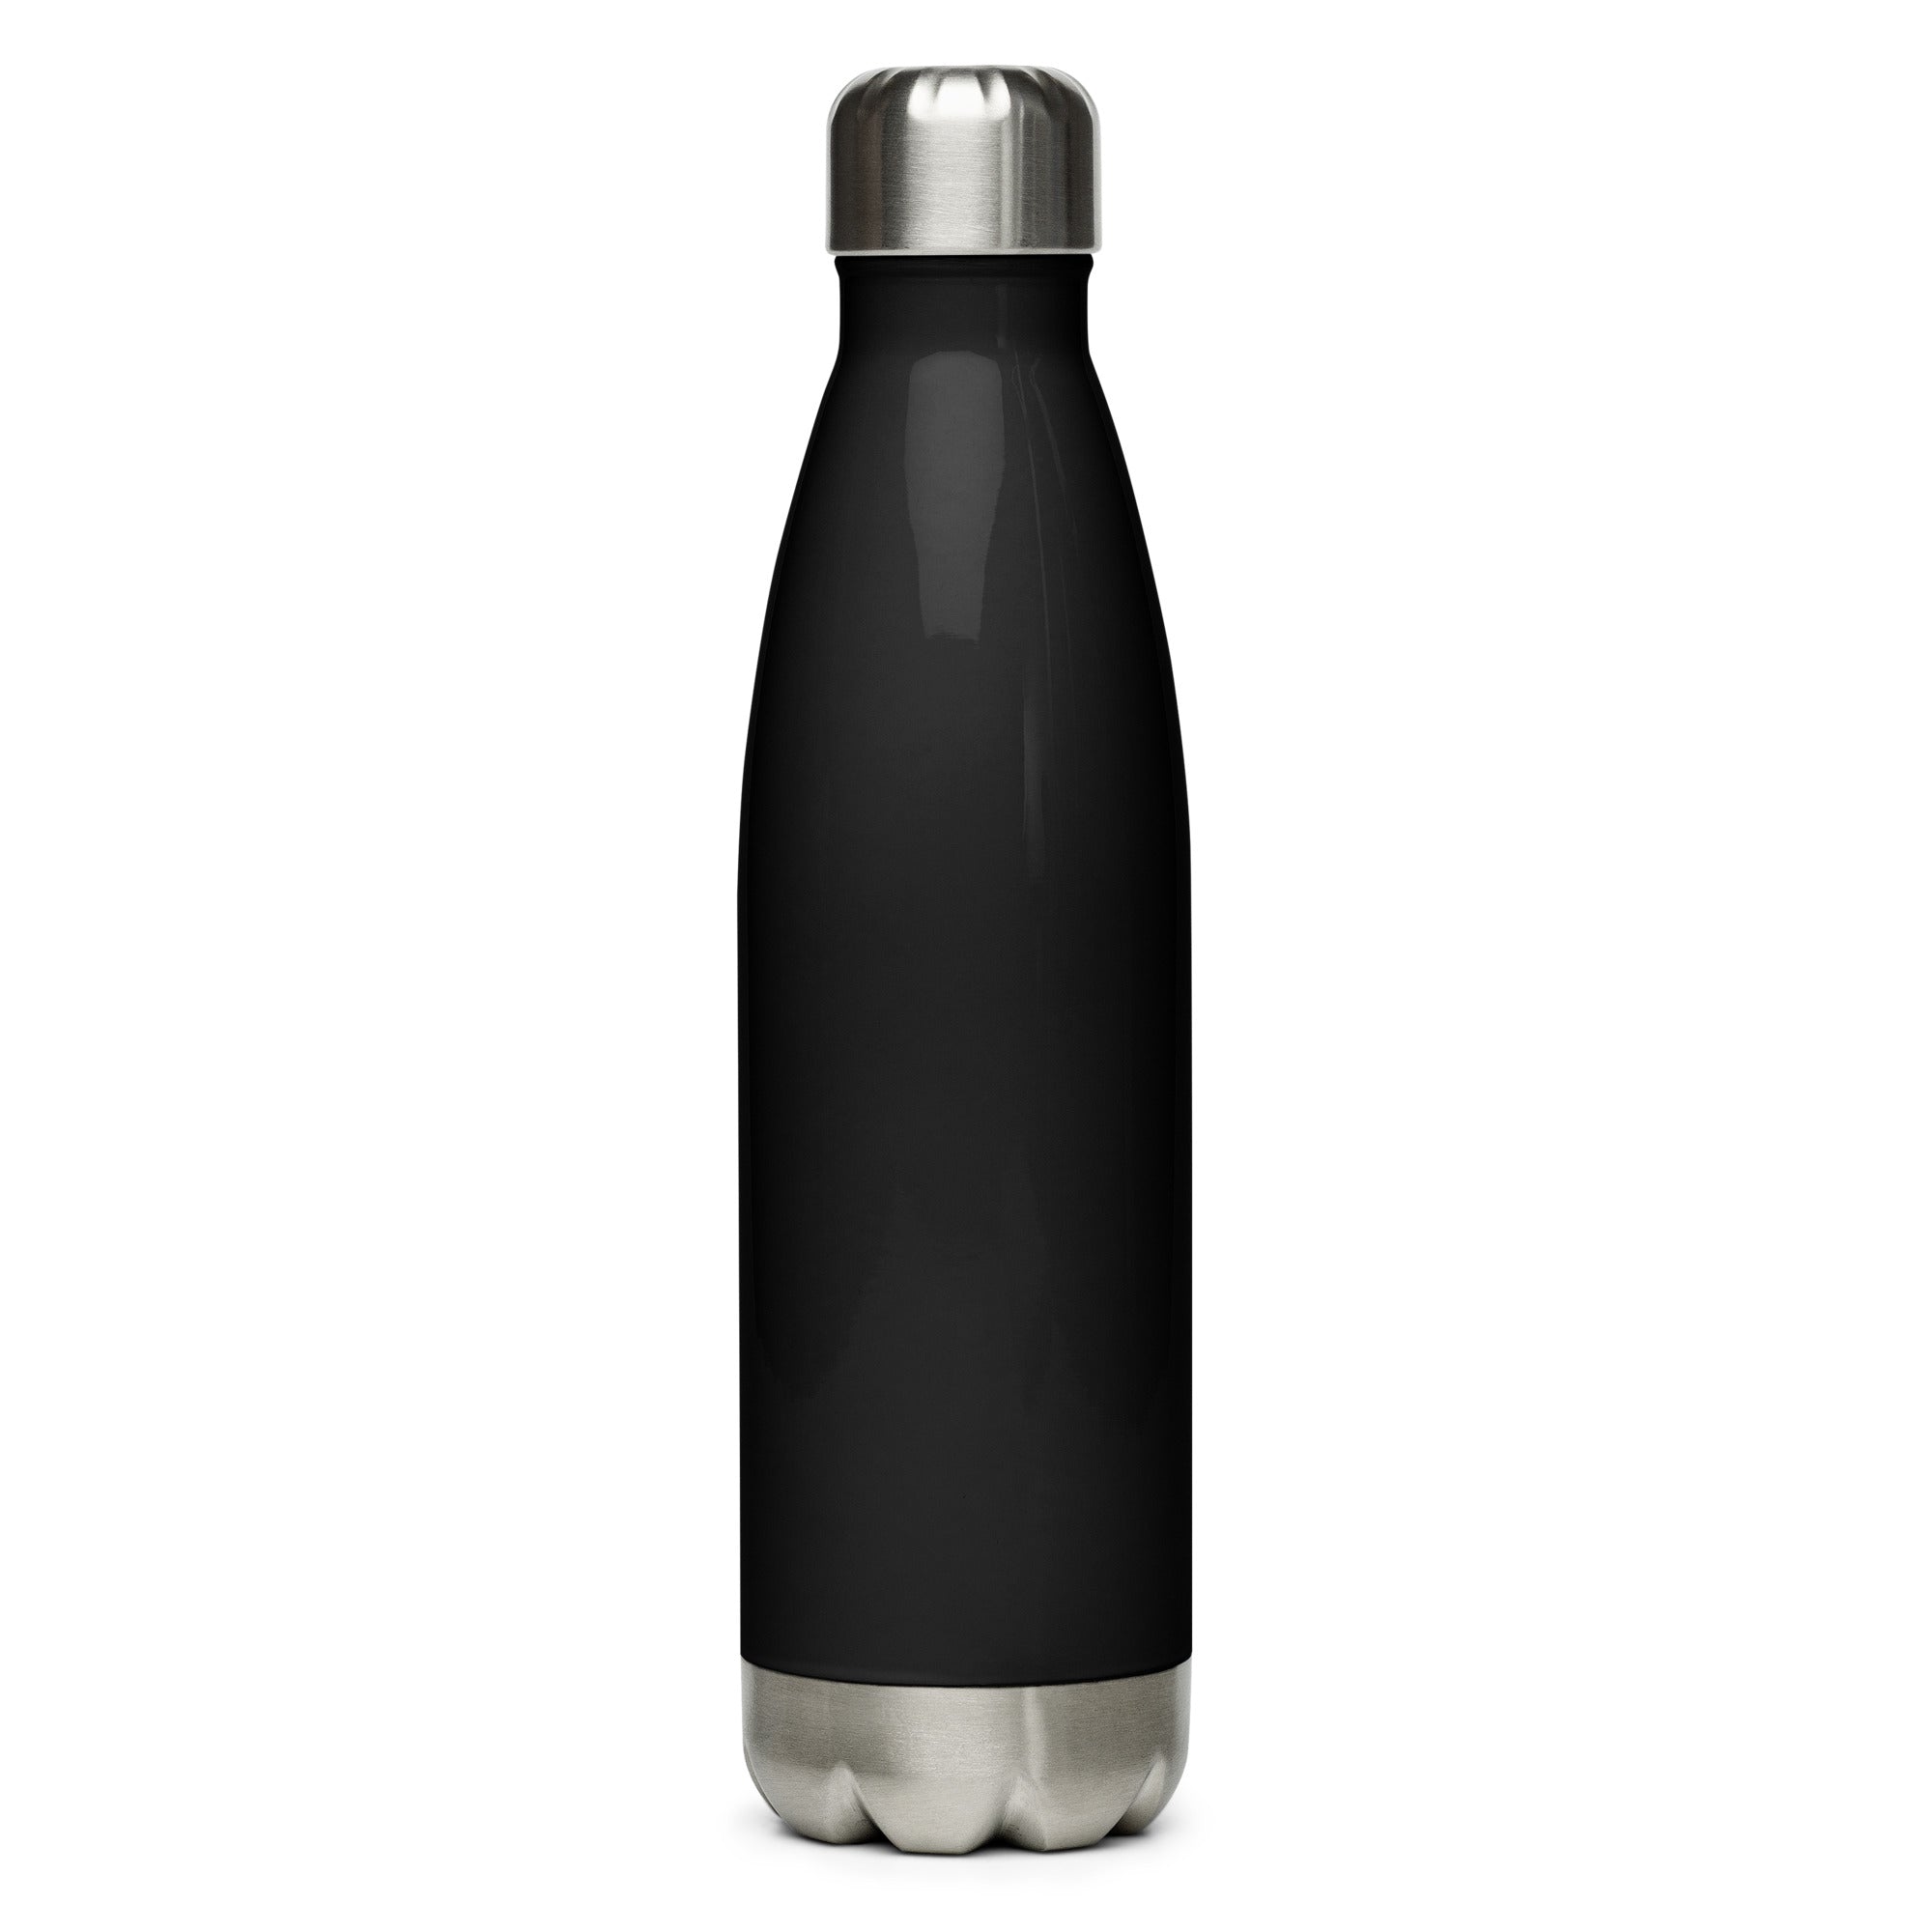 PURE OFFICIATING Stainless Steel Water Bottle